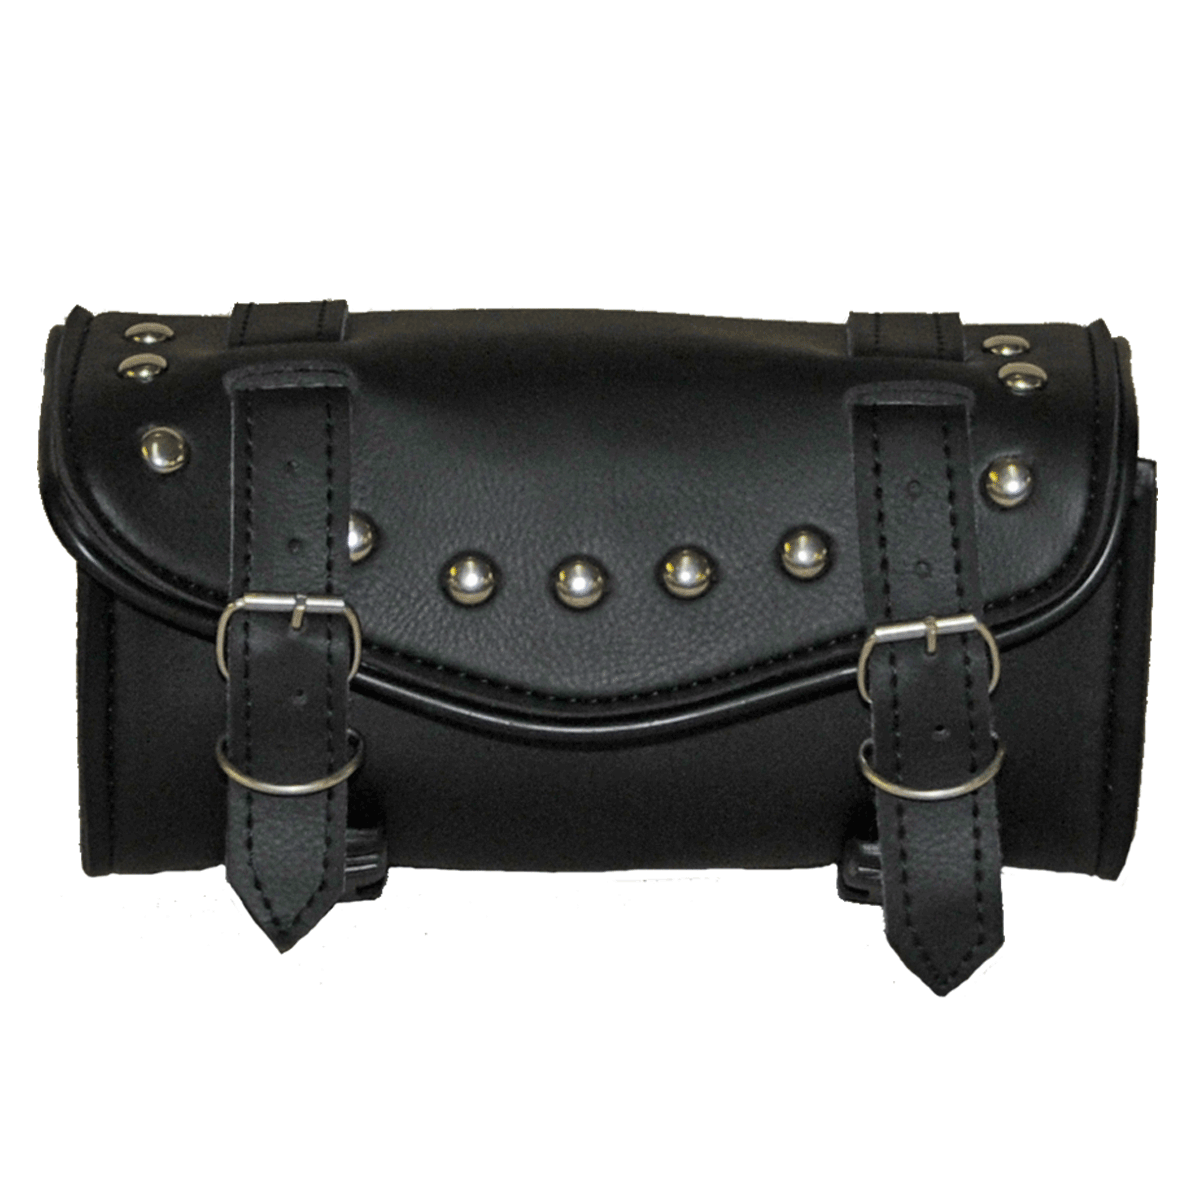 Vance Leather Hard Shell 2 Strap Studded Tool Bag with V-Shaped Flap